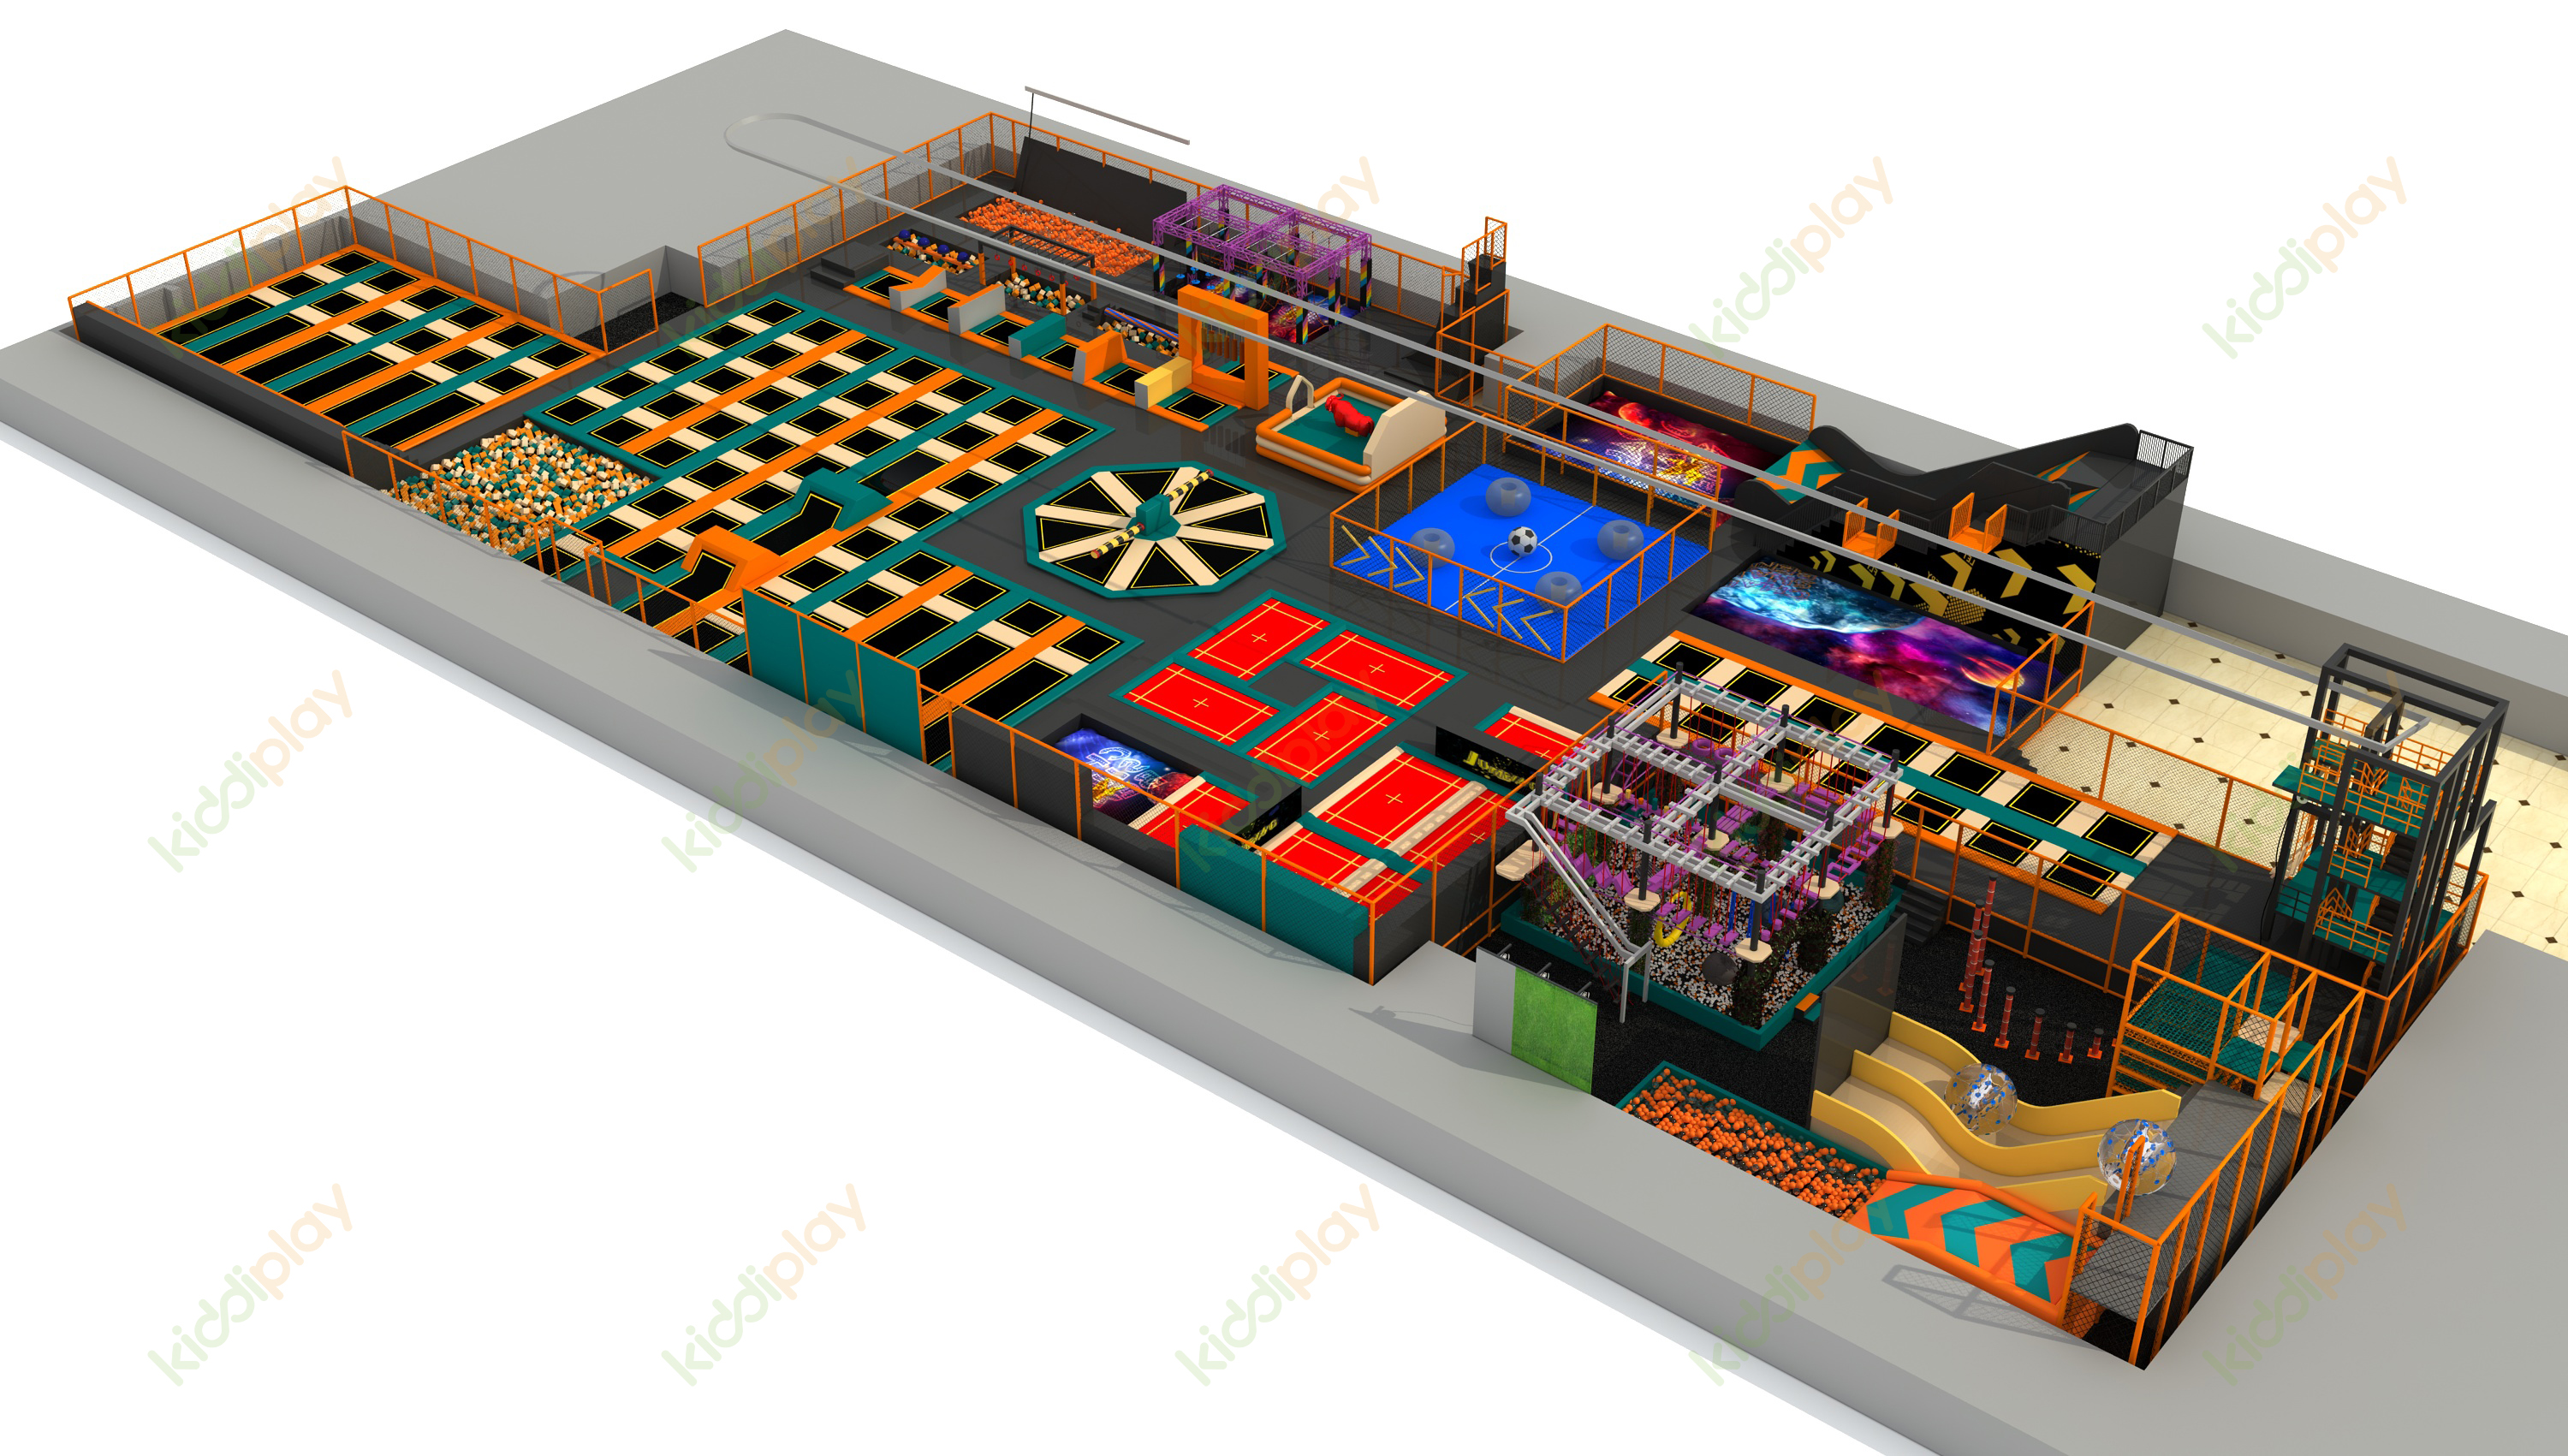 Kiddiplay Commercial Extreme Indoor Trampoline Park